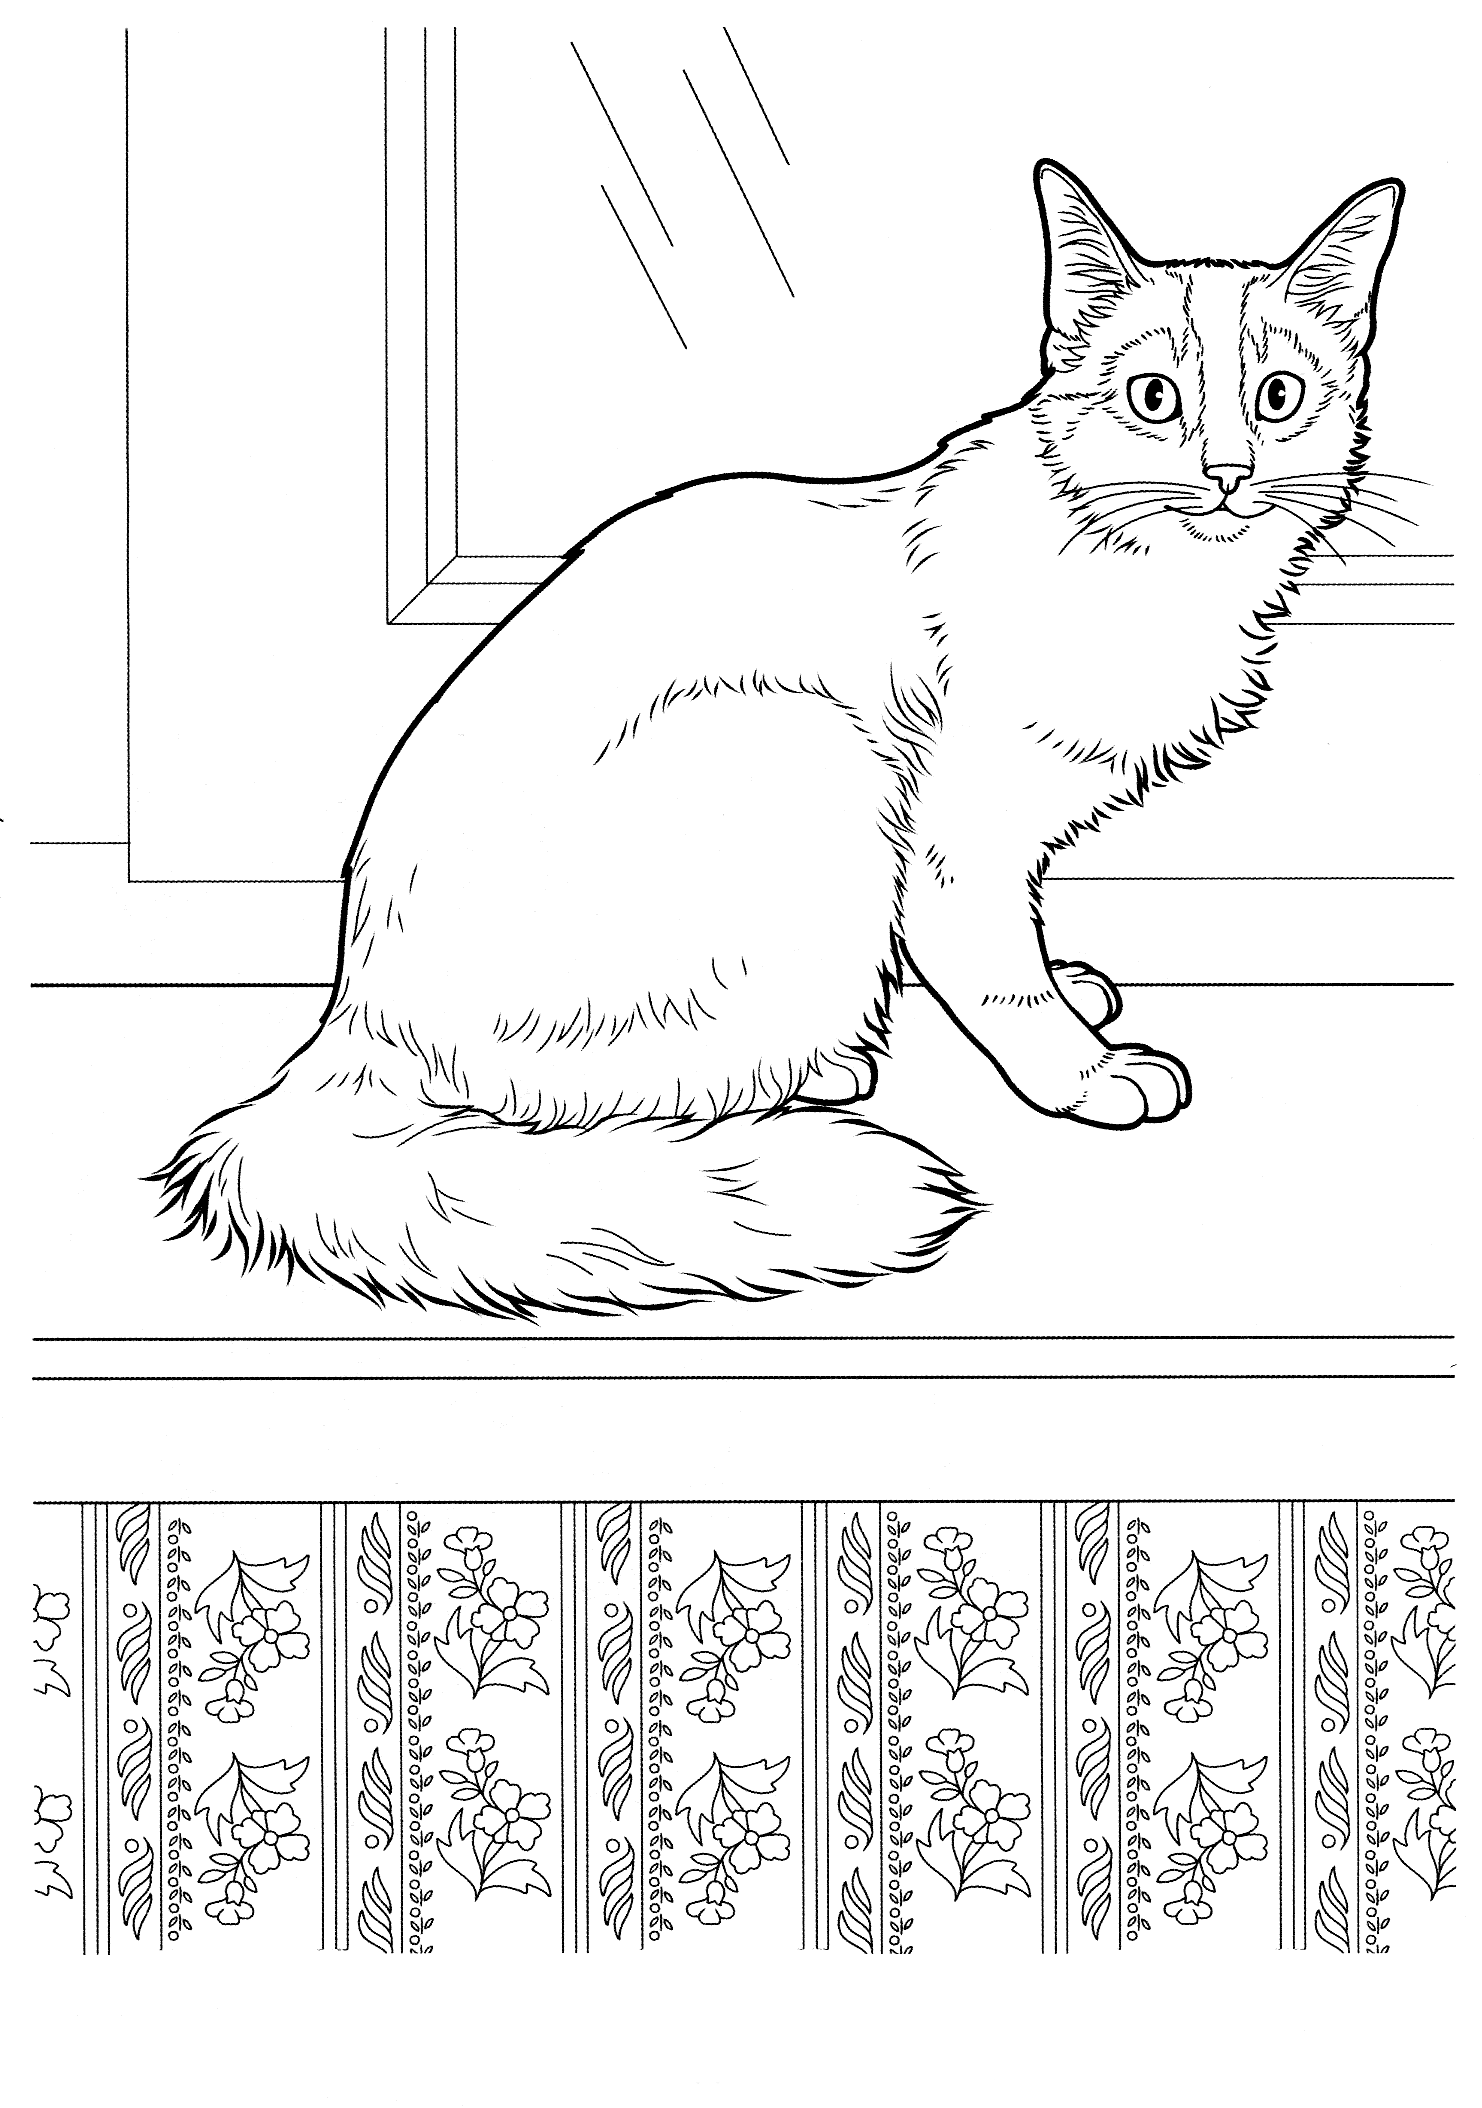 Download Coloring page - Somali cat